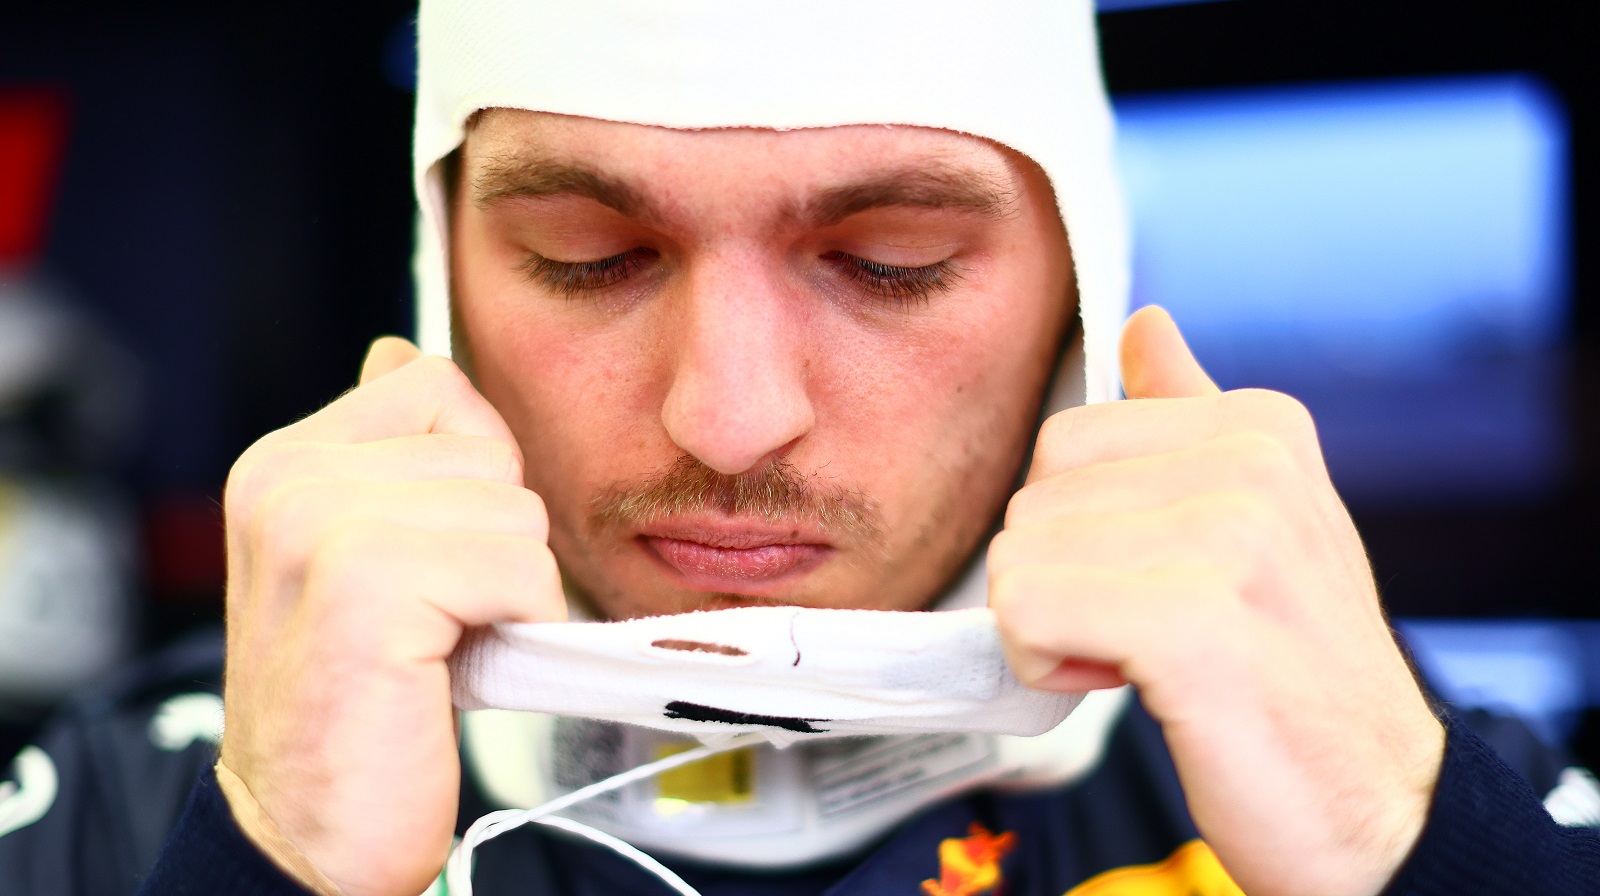 Max Verstappen’s Angry Outbursts Suggest the Pressure of Defending His Formula 1 Title Got to Him 1 Race Into the Season